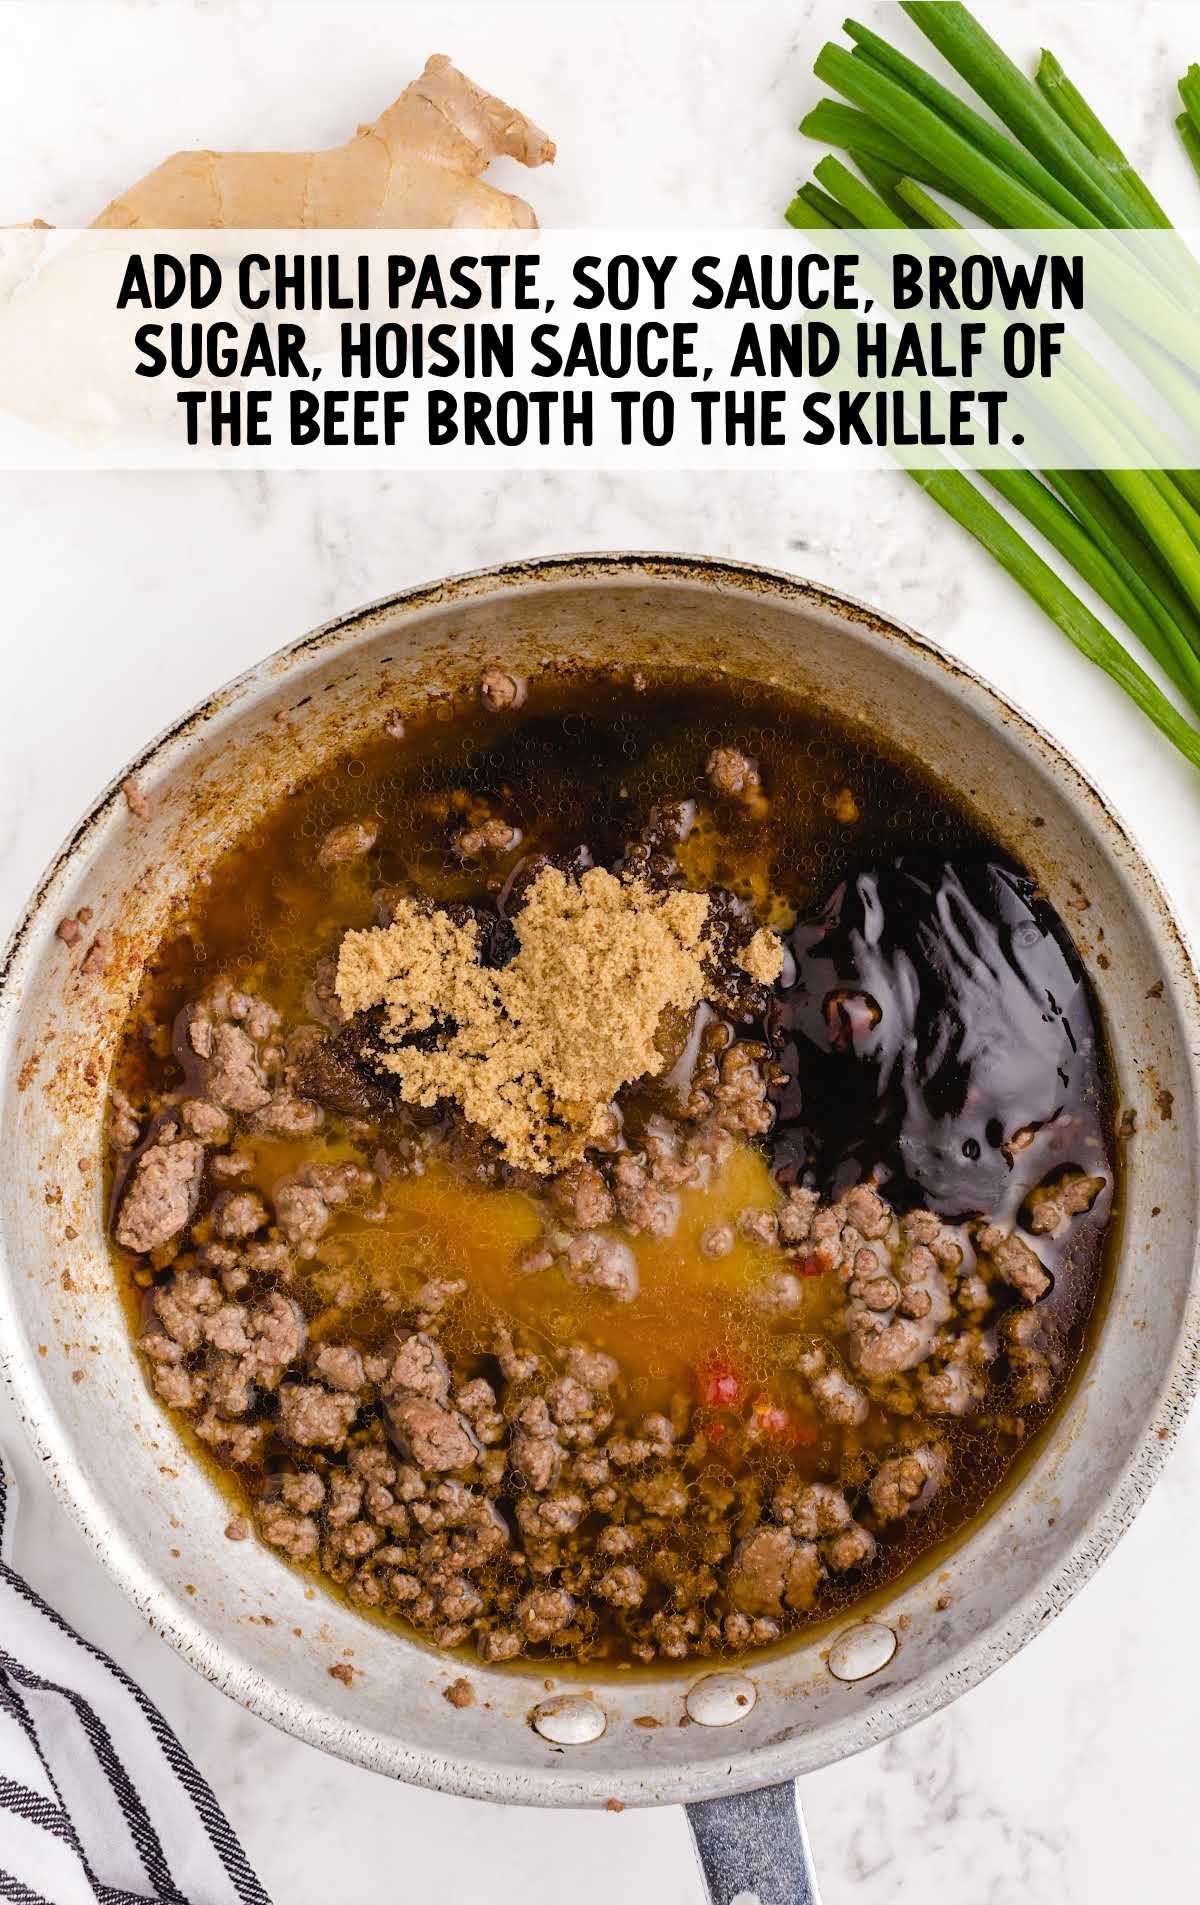 chili paste, soy sauce, brown sugar, hoisin sauce, beef broth being cooked in a skillet